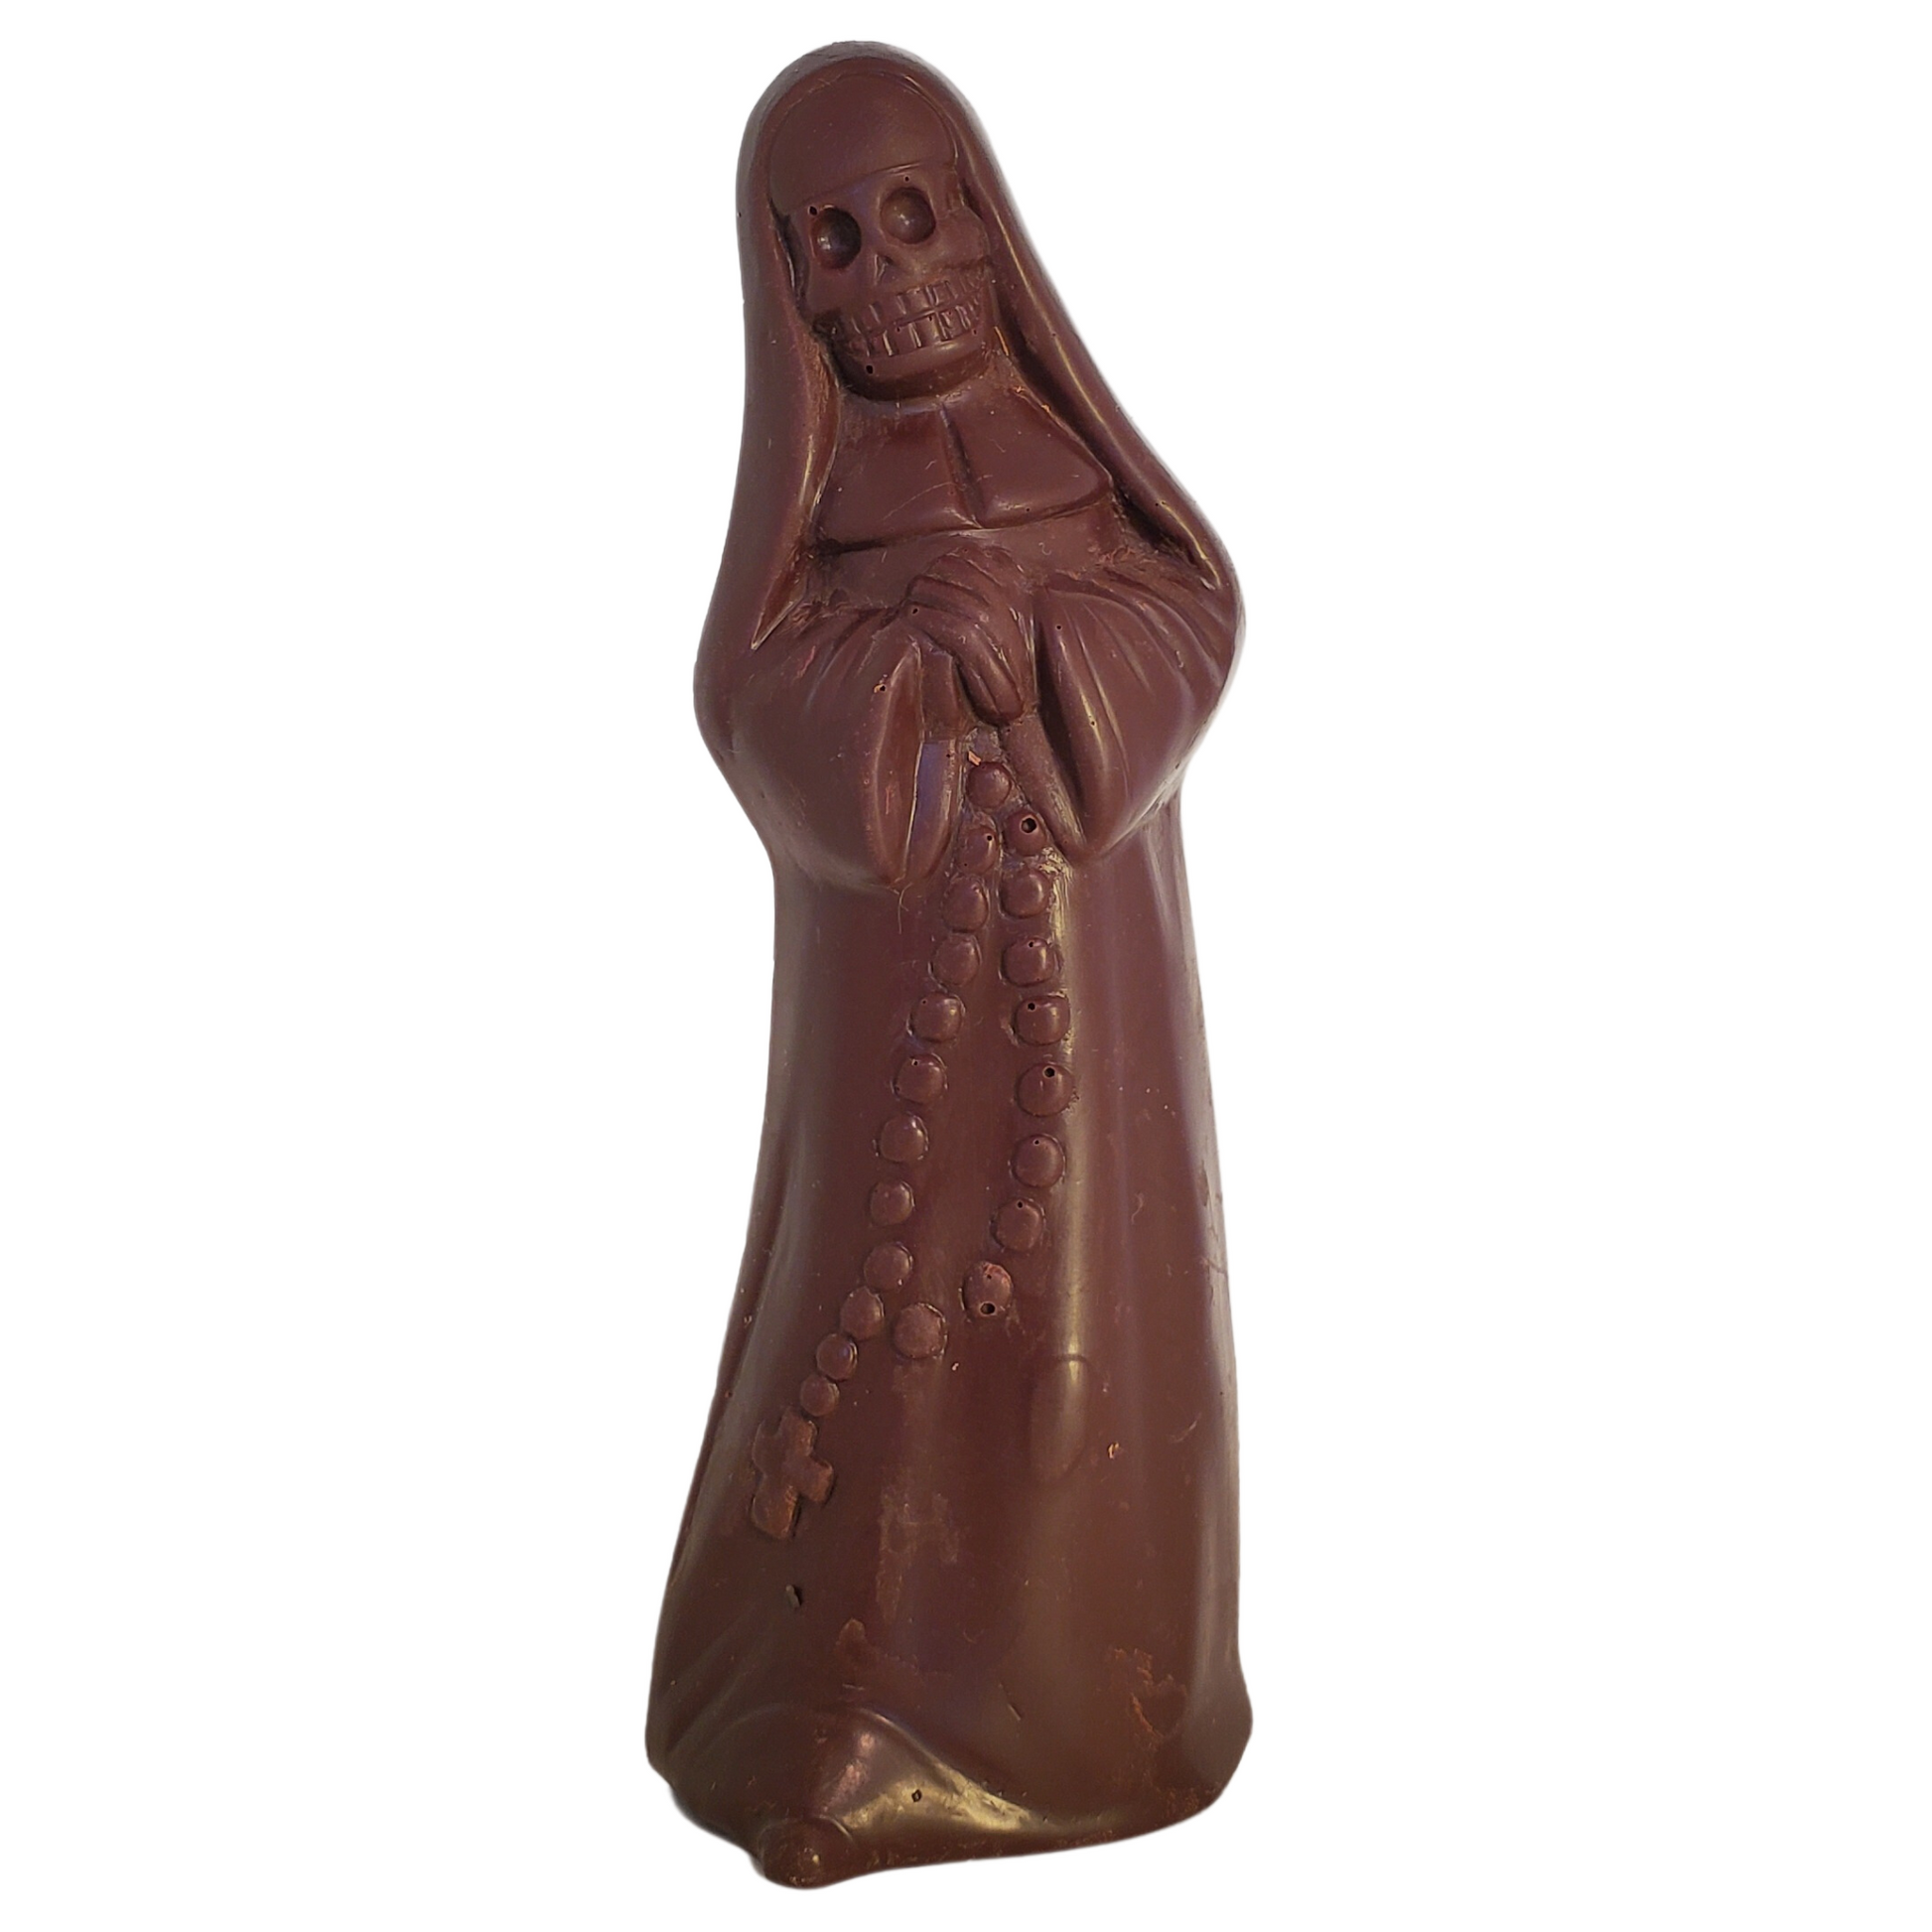 Dark chocolate figure of a nun with a skull face and wearing a long robe.